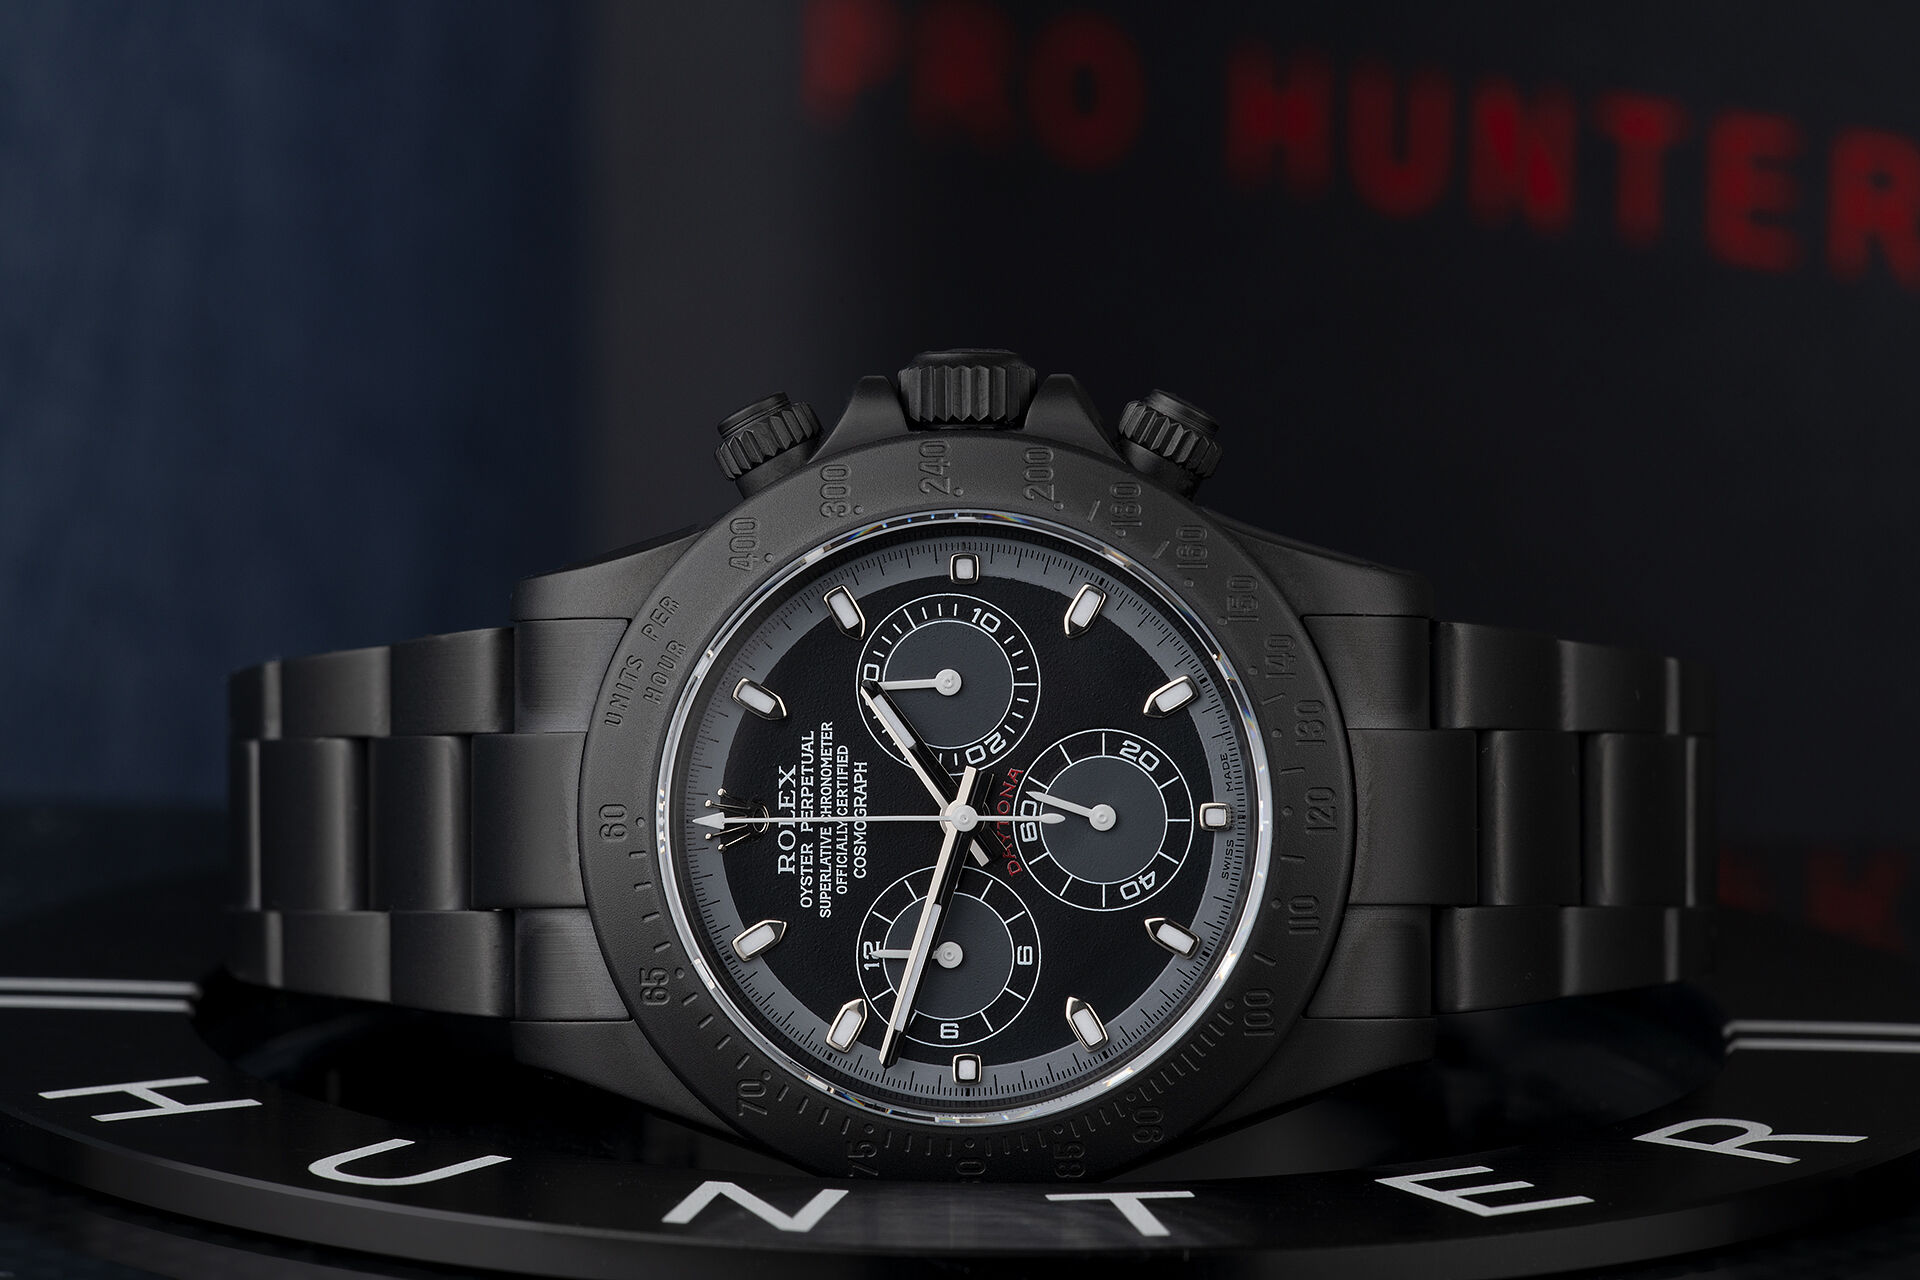 ref 116520 | '1 of 100' Complete Set | Pro Hunter Paul Newman